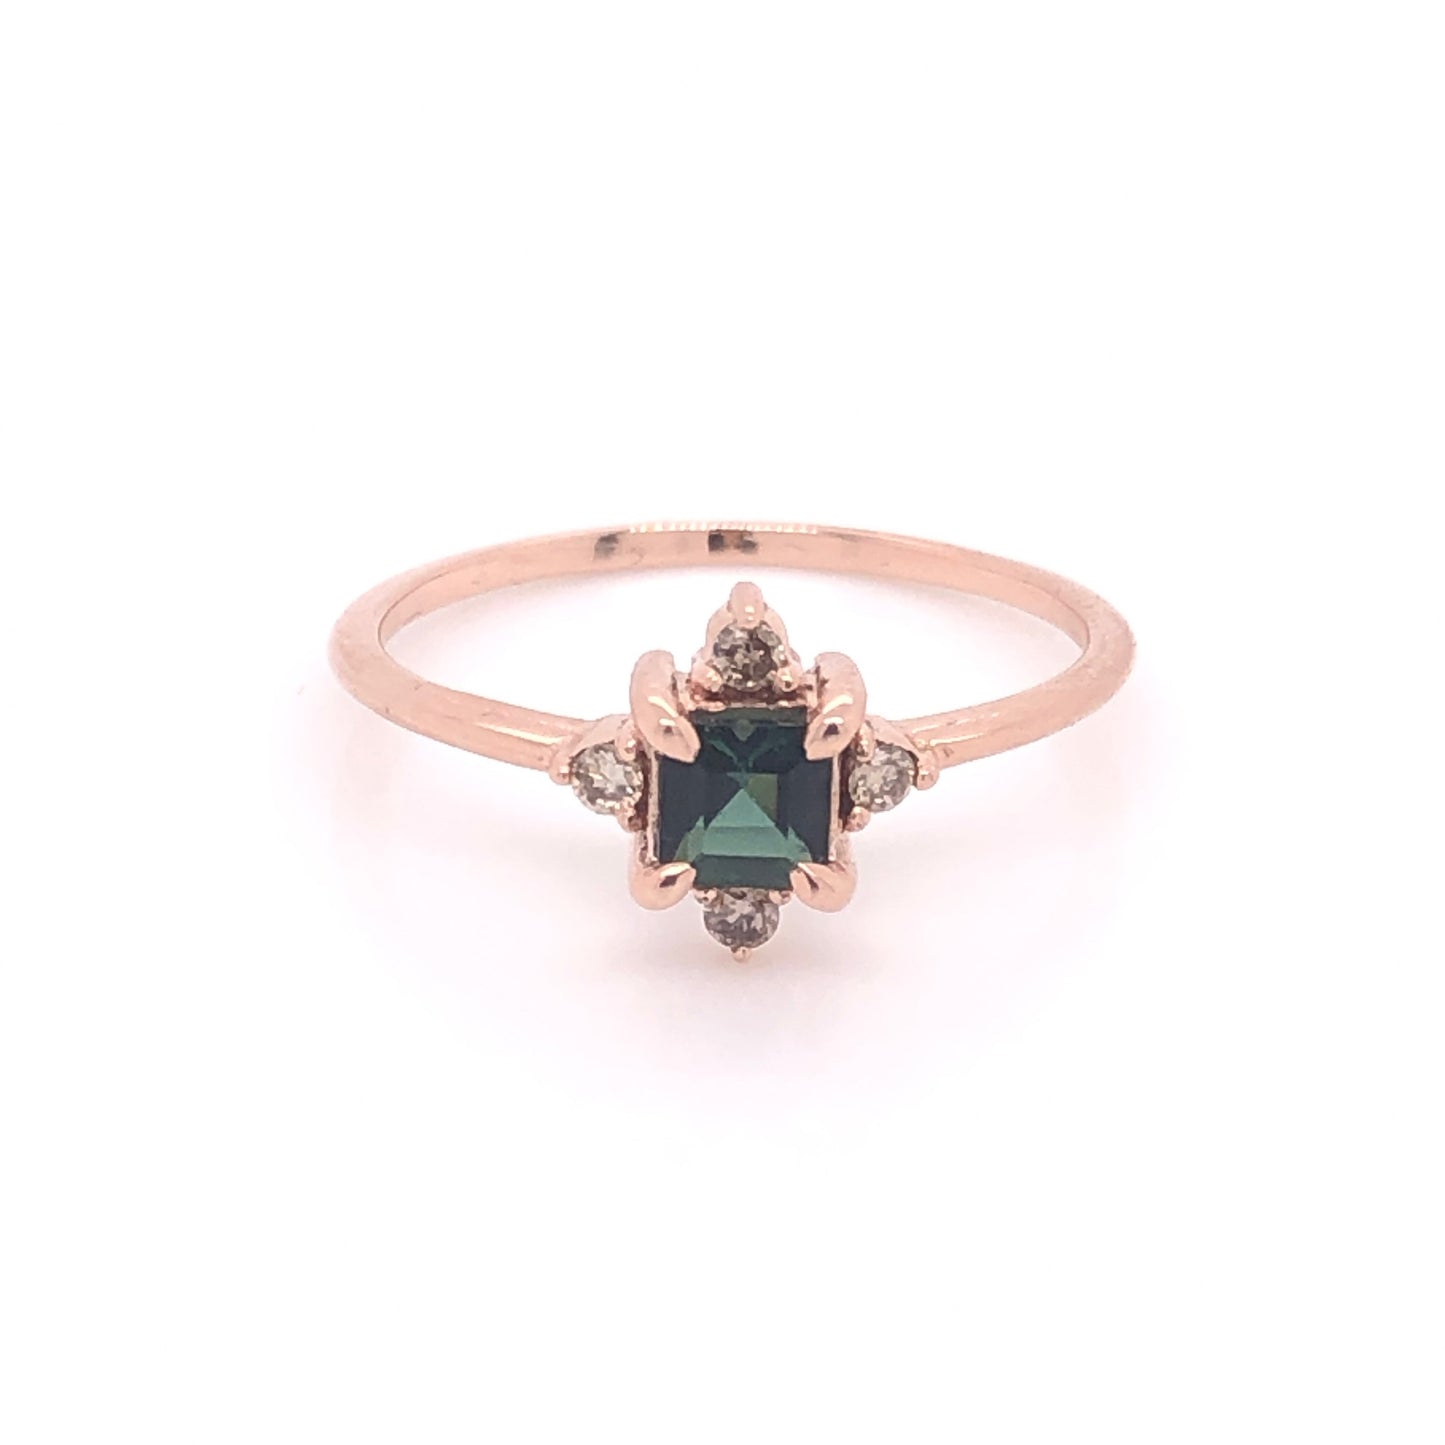 IMMEDIATE DELIVERY / Marie Antoinette Ring / 14k Rose Gold / Size 7